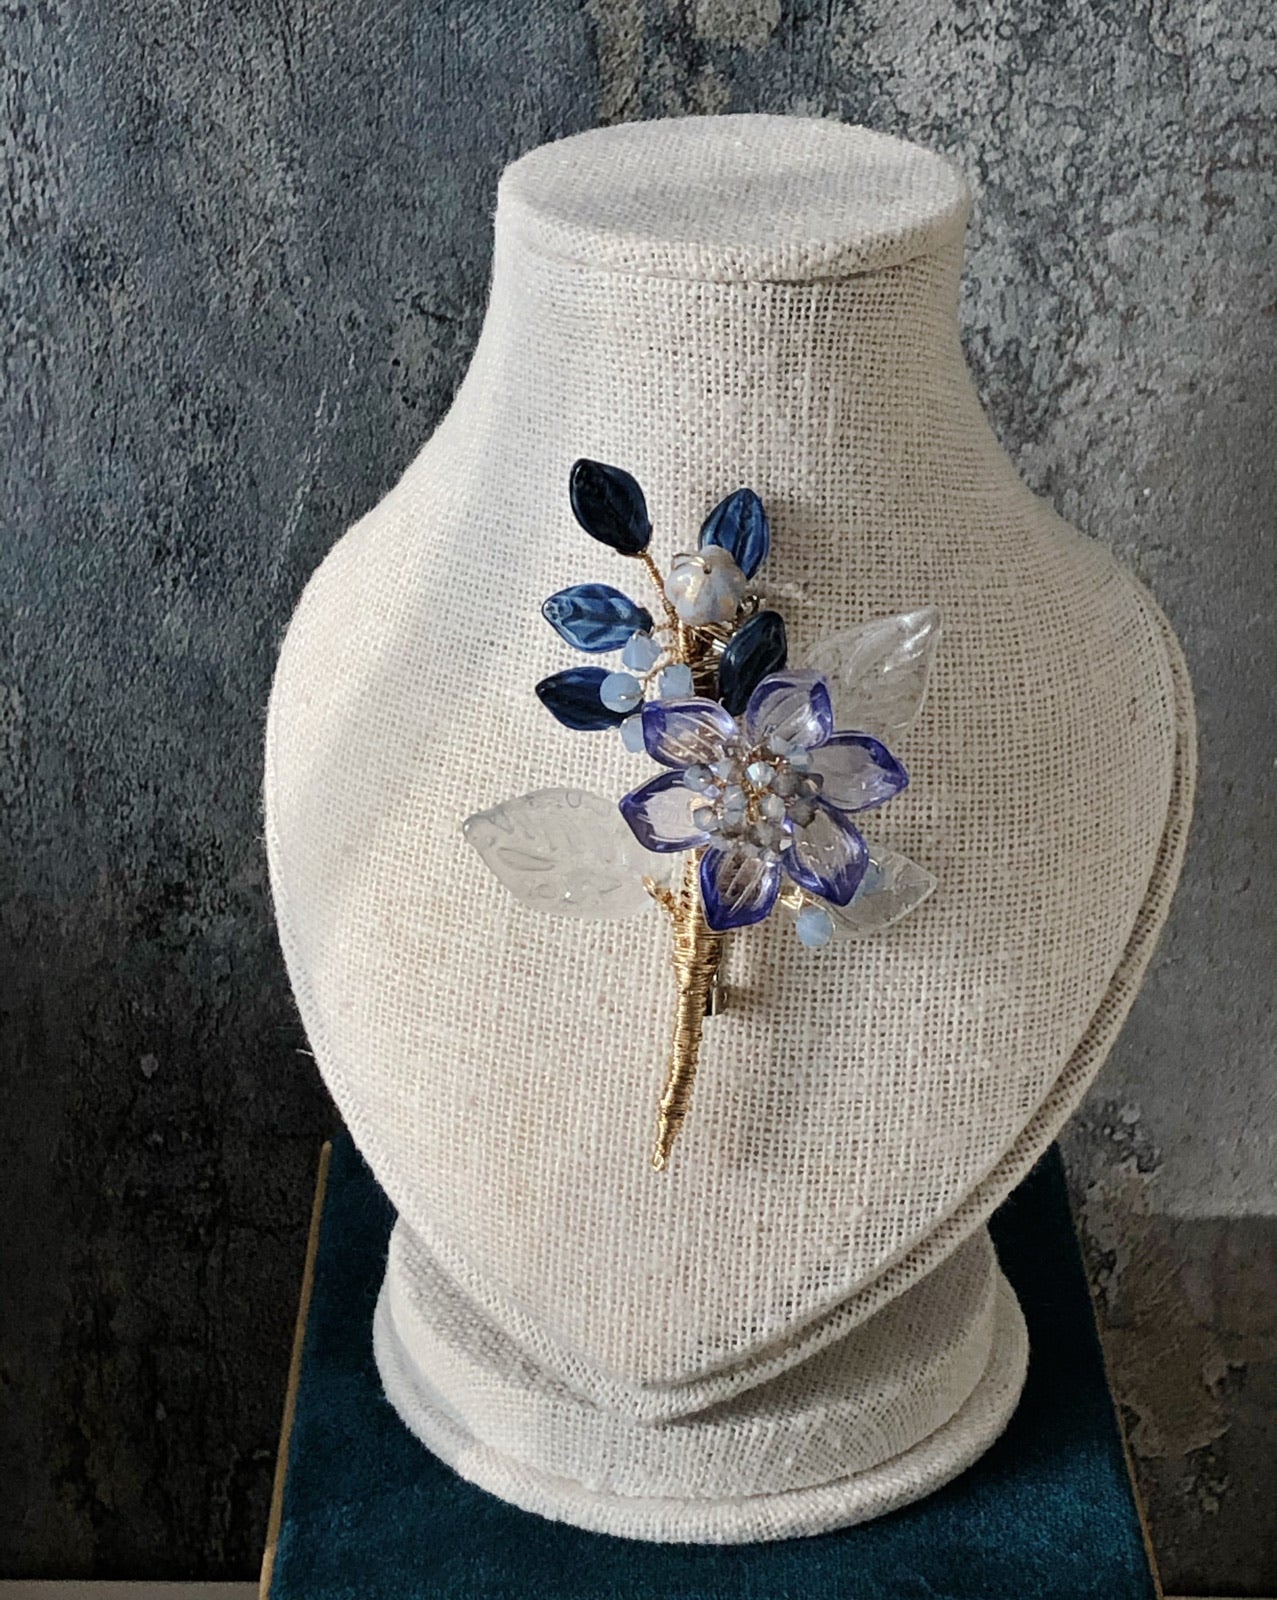 “Thank You” winter lotus mini bouquet floral brooch in blue and gold